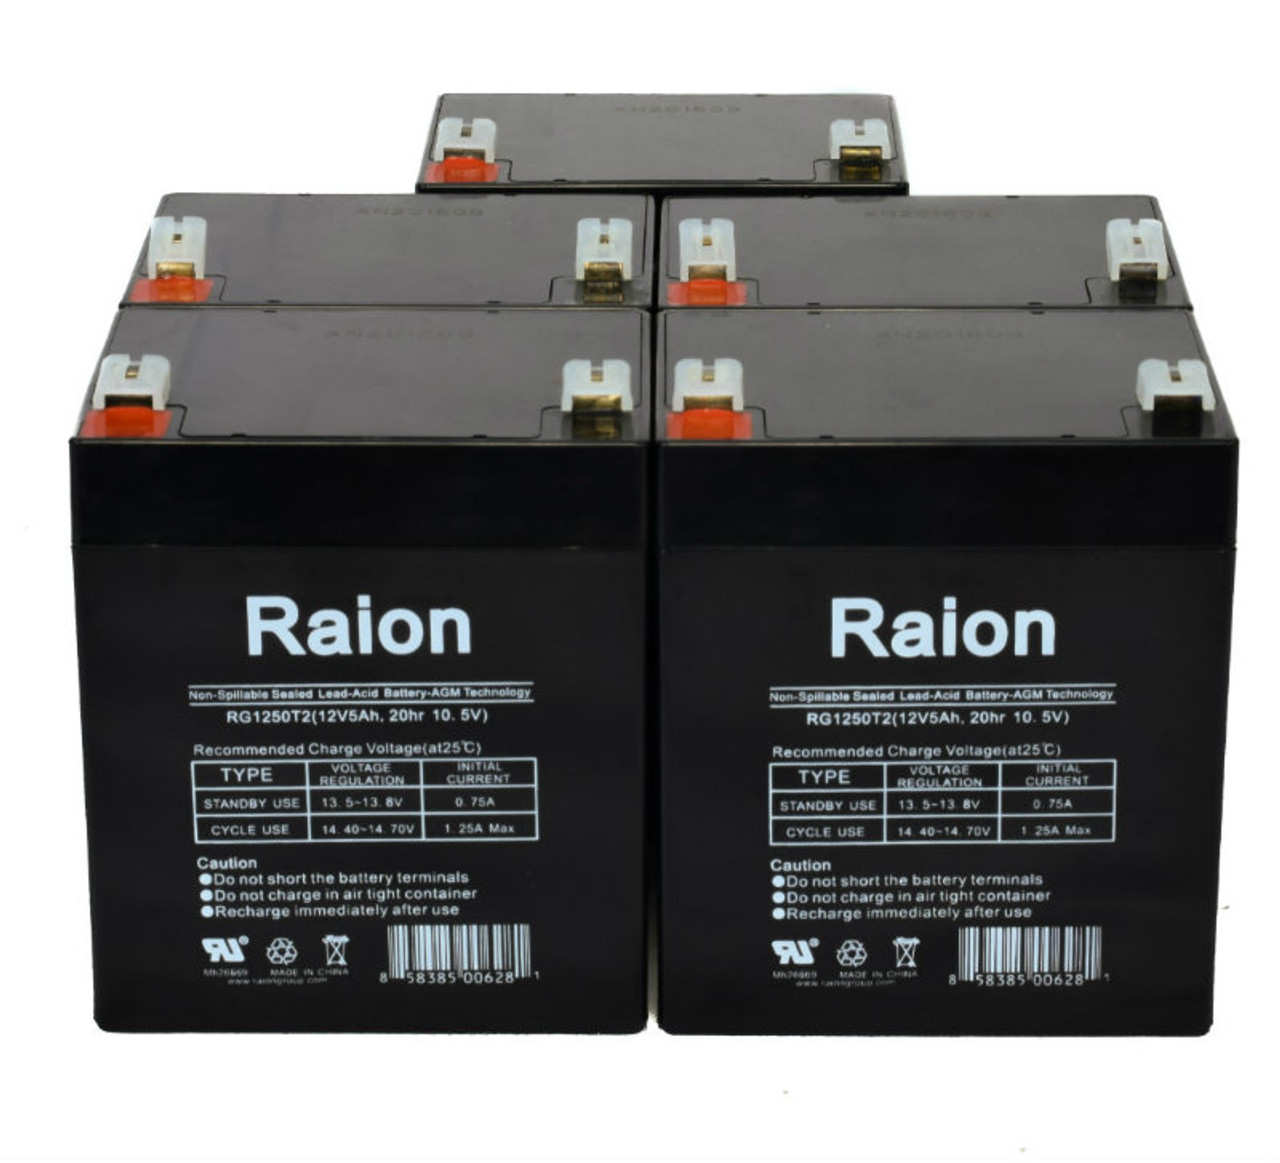 Raion Power 12V 5Ah RG1250T2 Replacement Lead Acid Battery for MK ES5-12 - 5 Pack